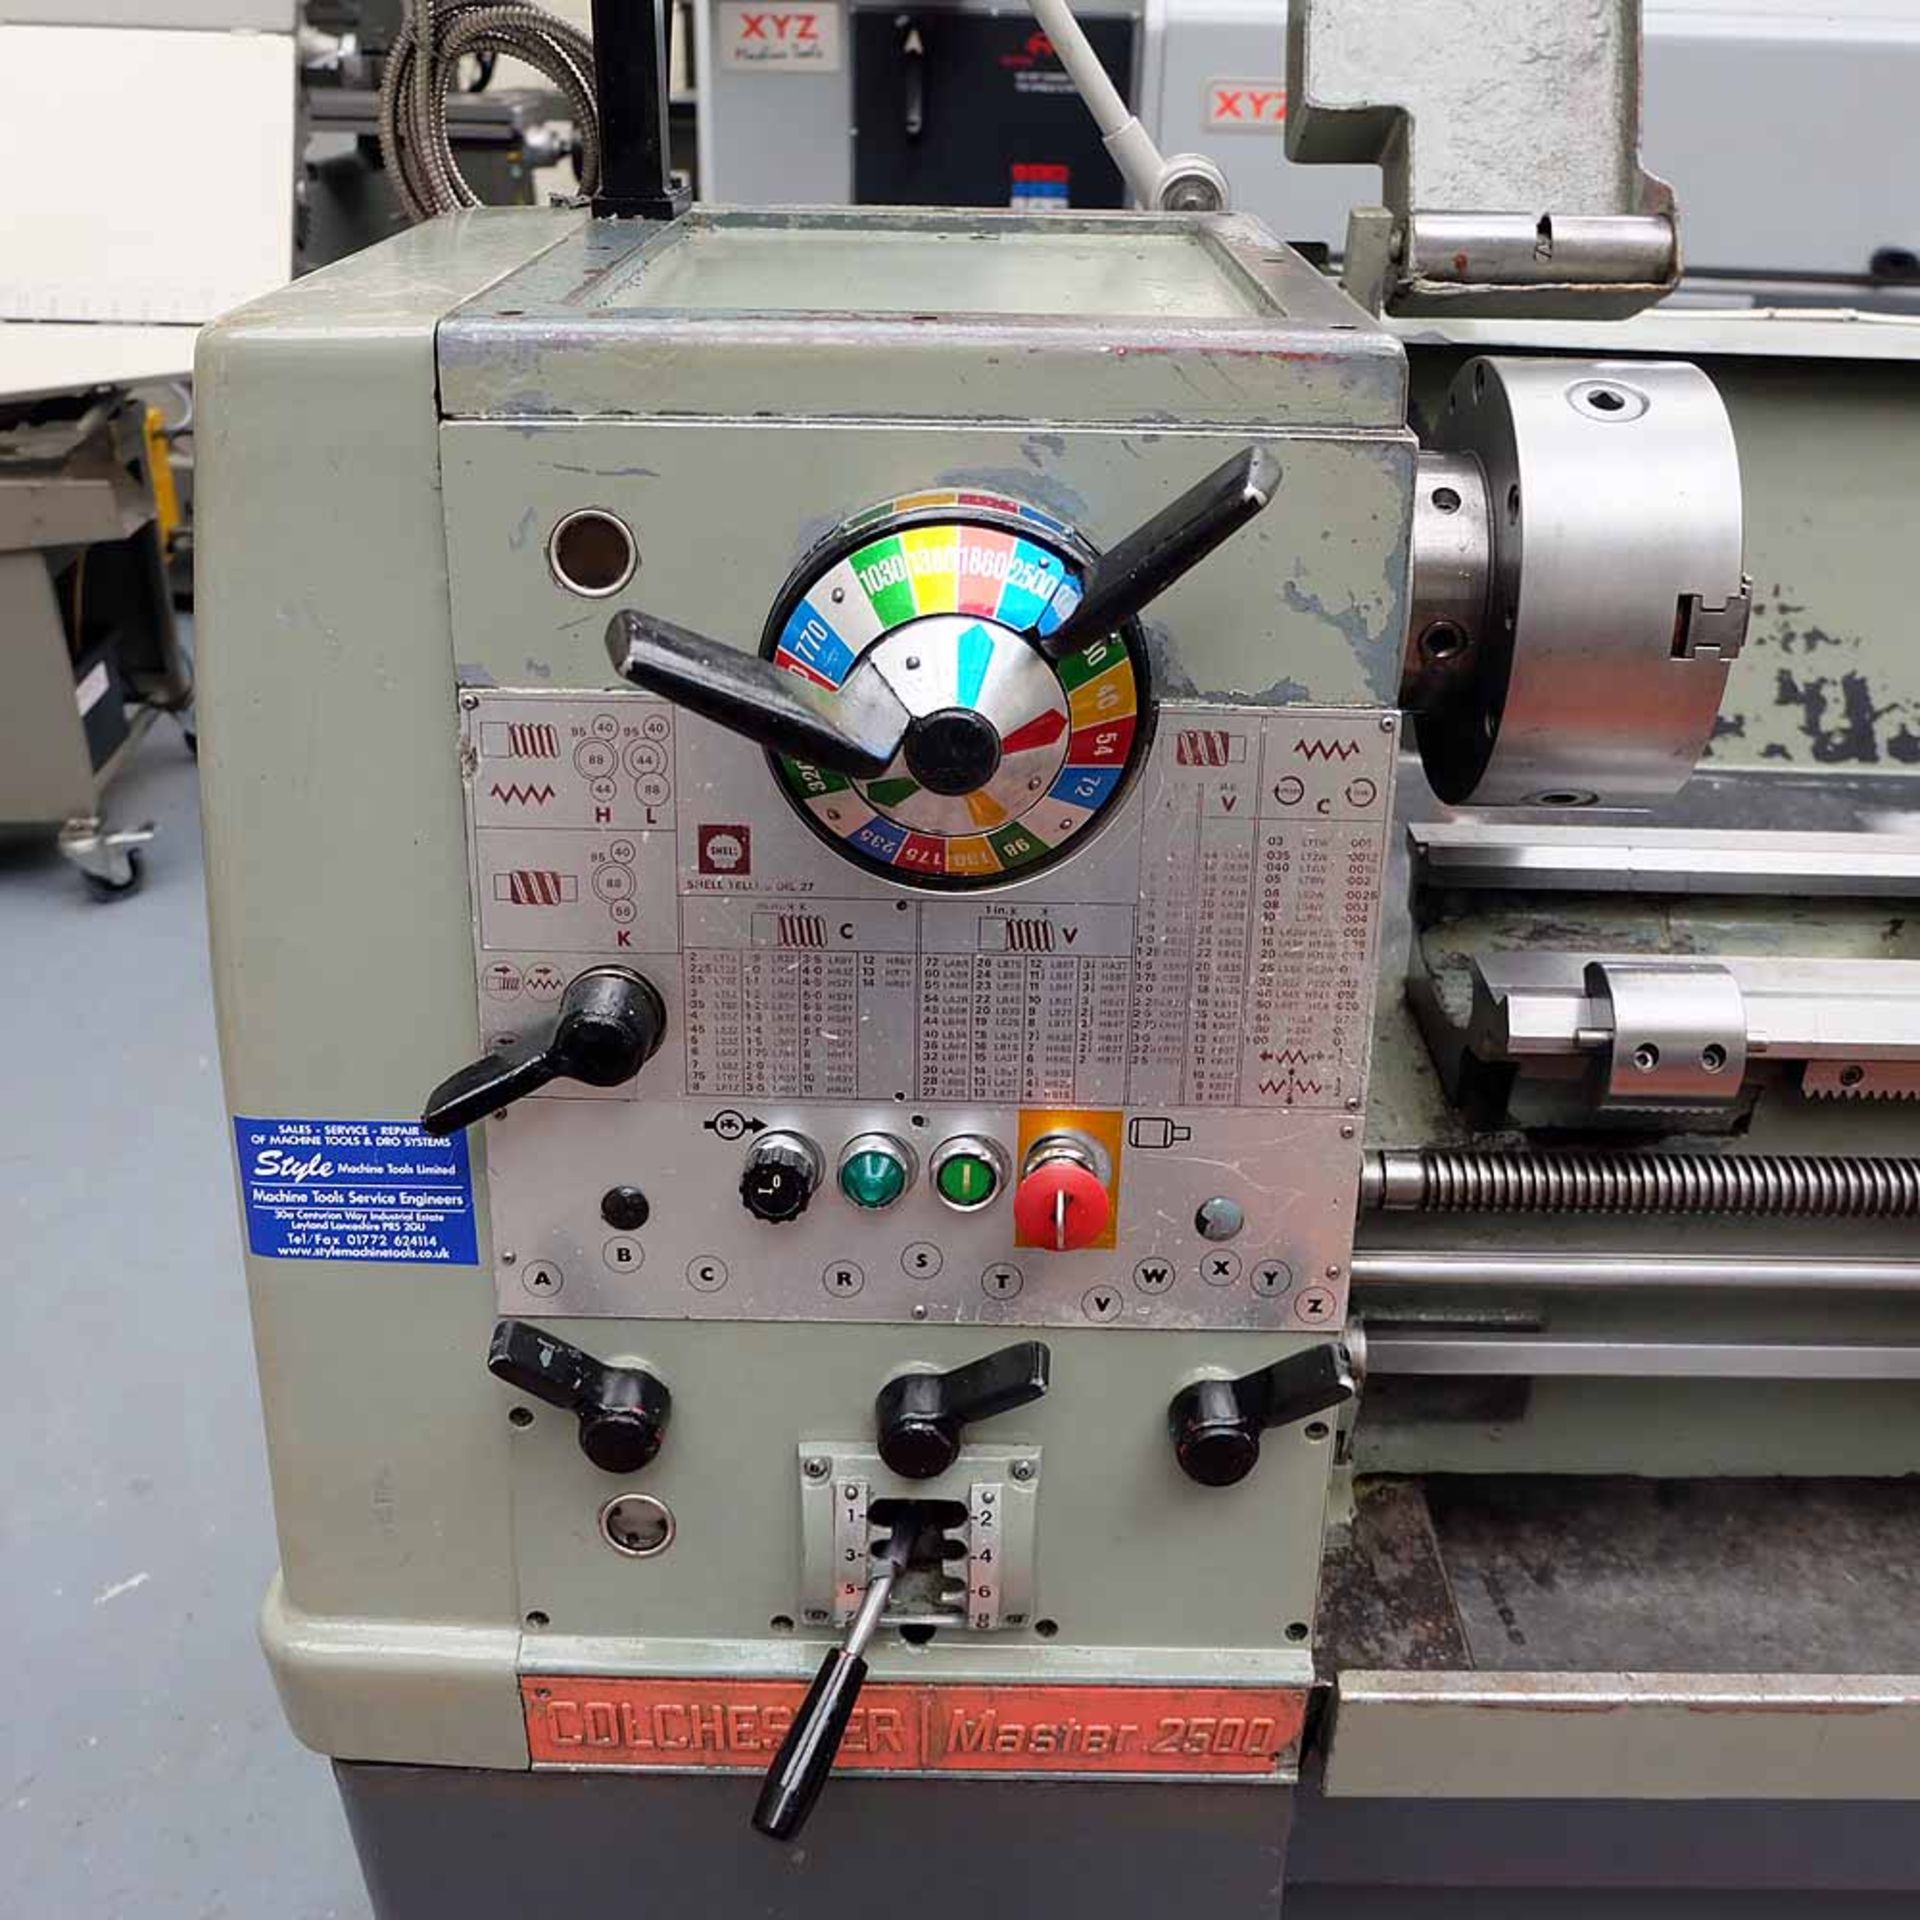 Colchester Master 2500 Gap Bed Centre Lathe. - Image 2 of 13